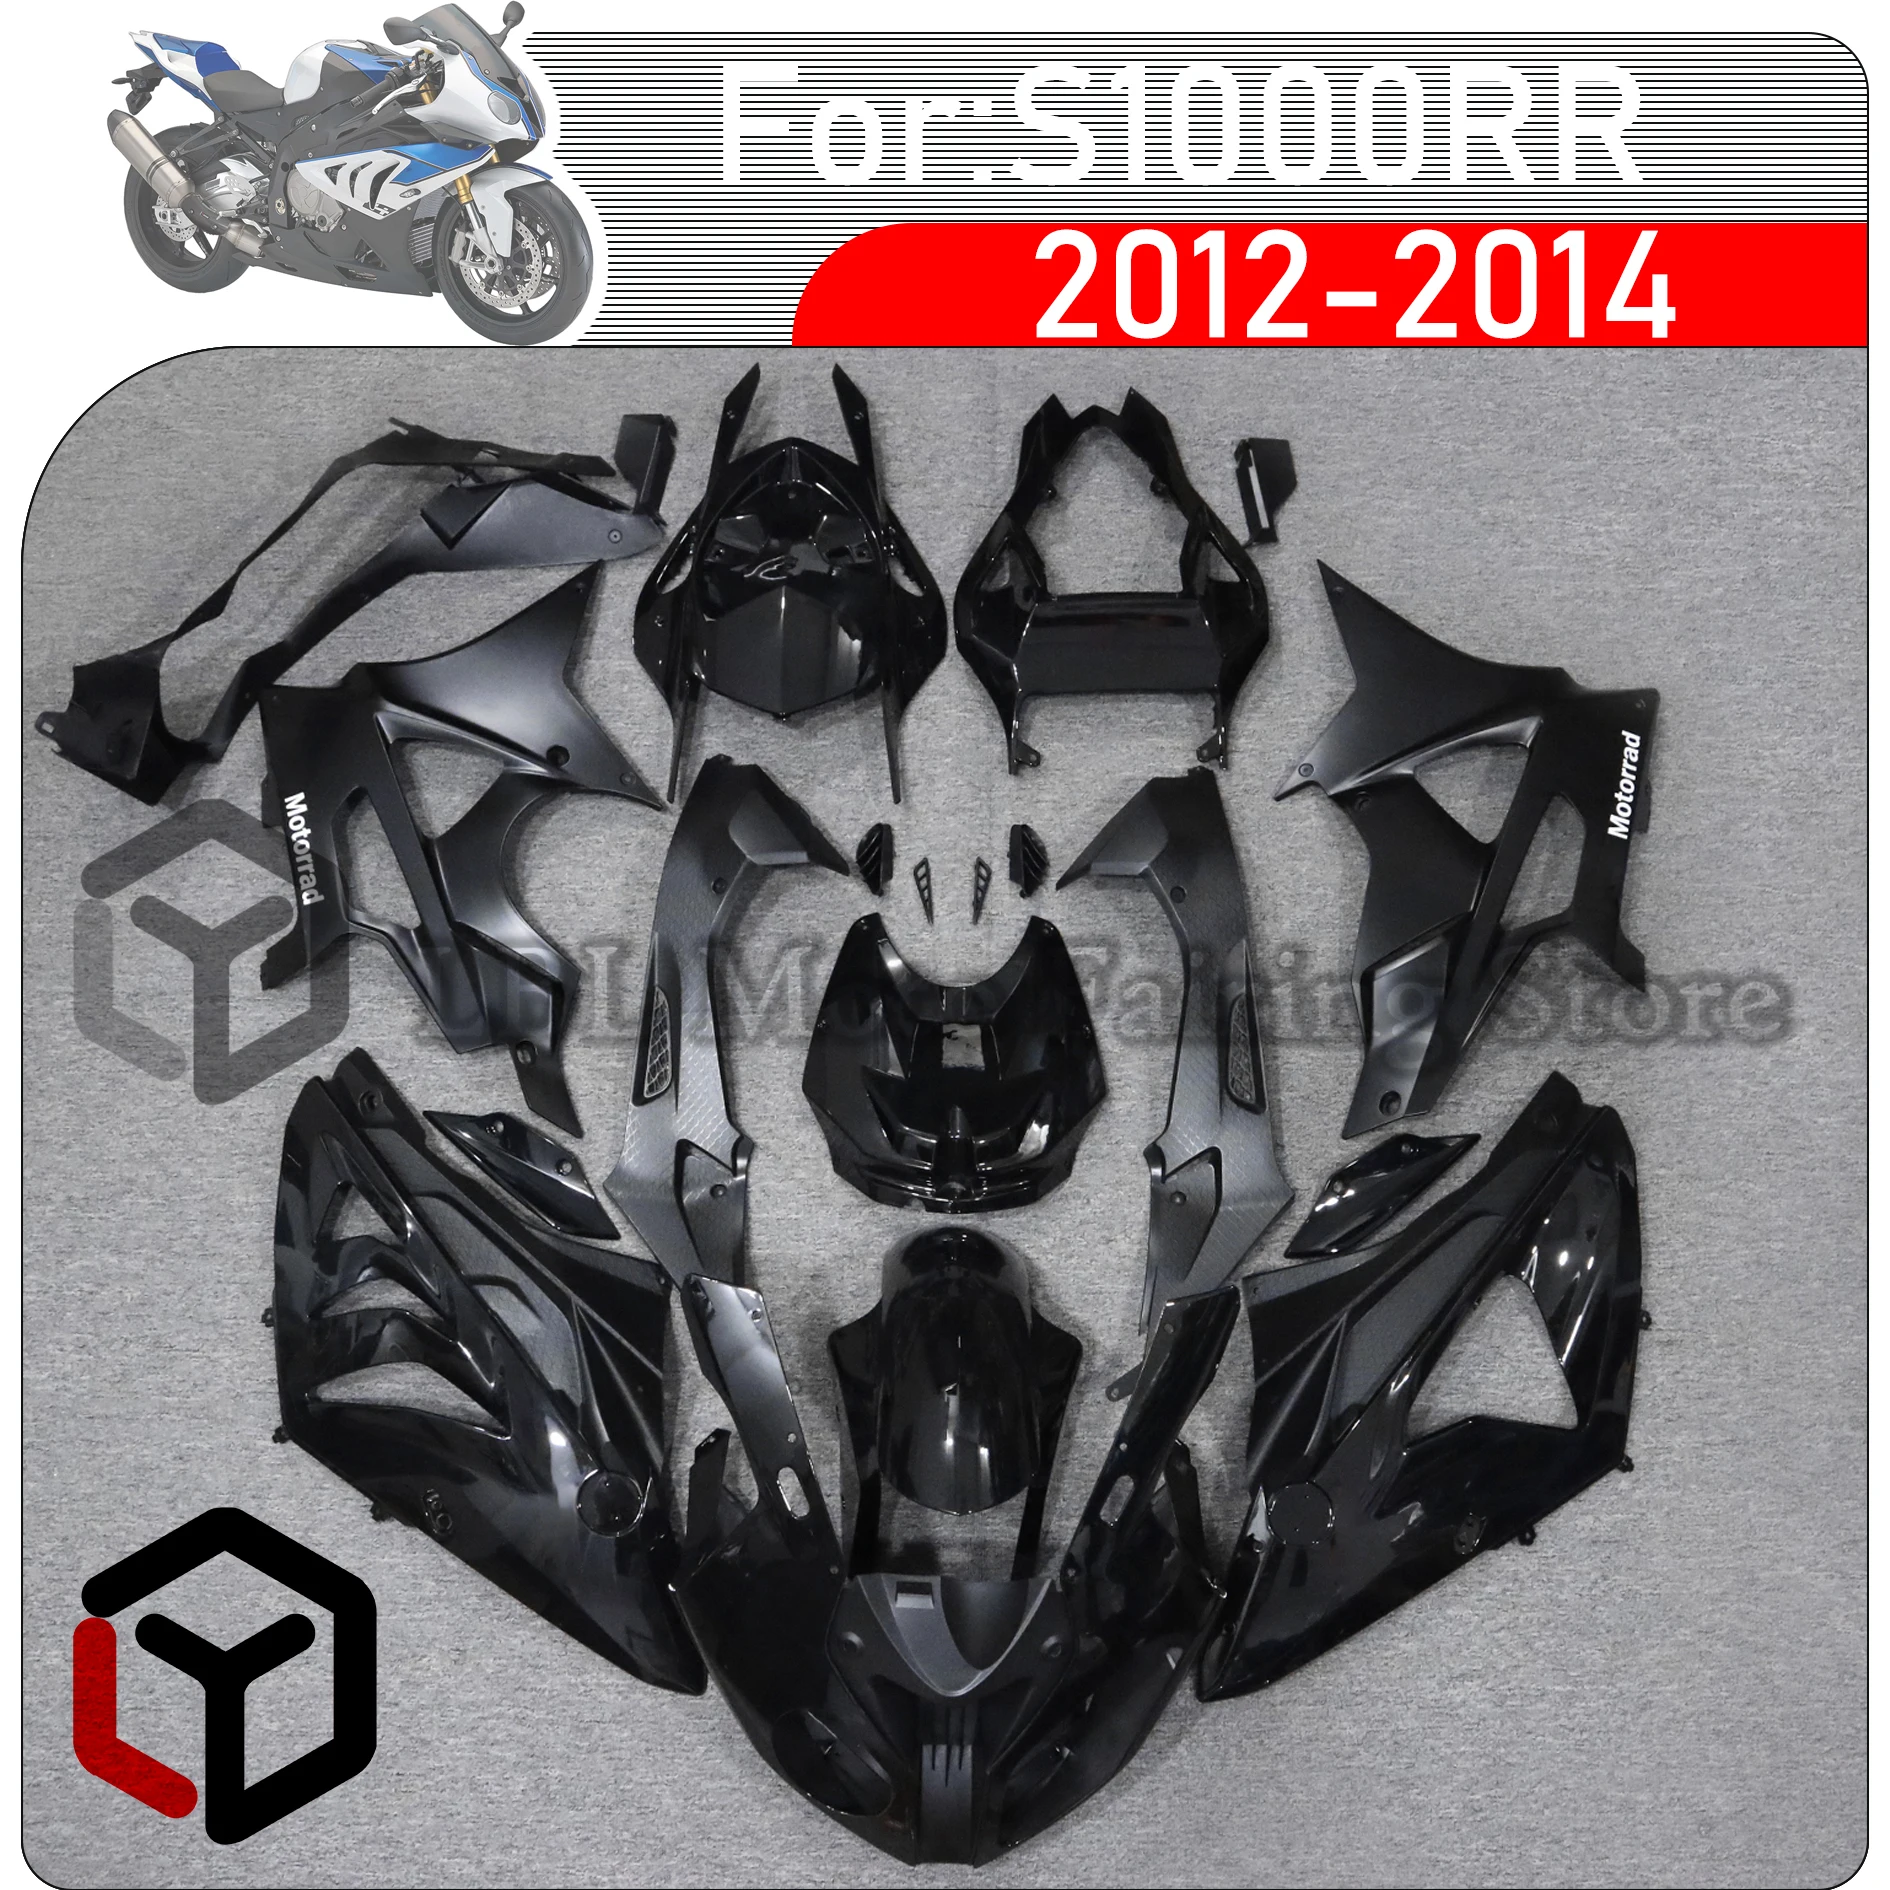 

For BMW S1000RR S1000 RR 2012 2013 2014 Motorcycle Full Body Fit Fairing S1000RR 2012~2014 ABS injection molding Full Fairing